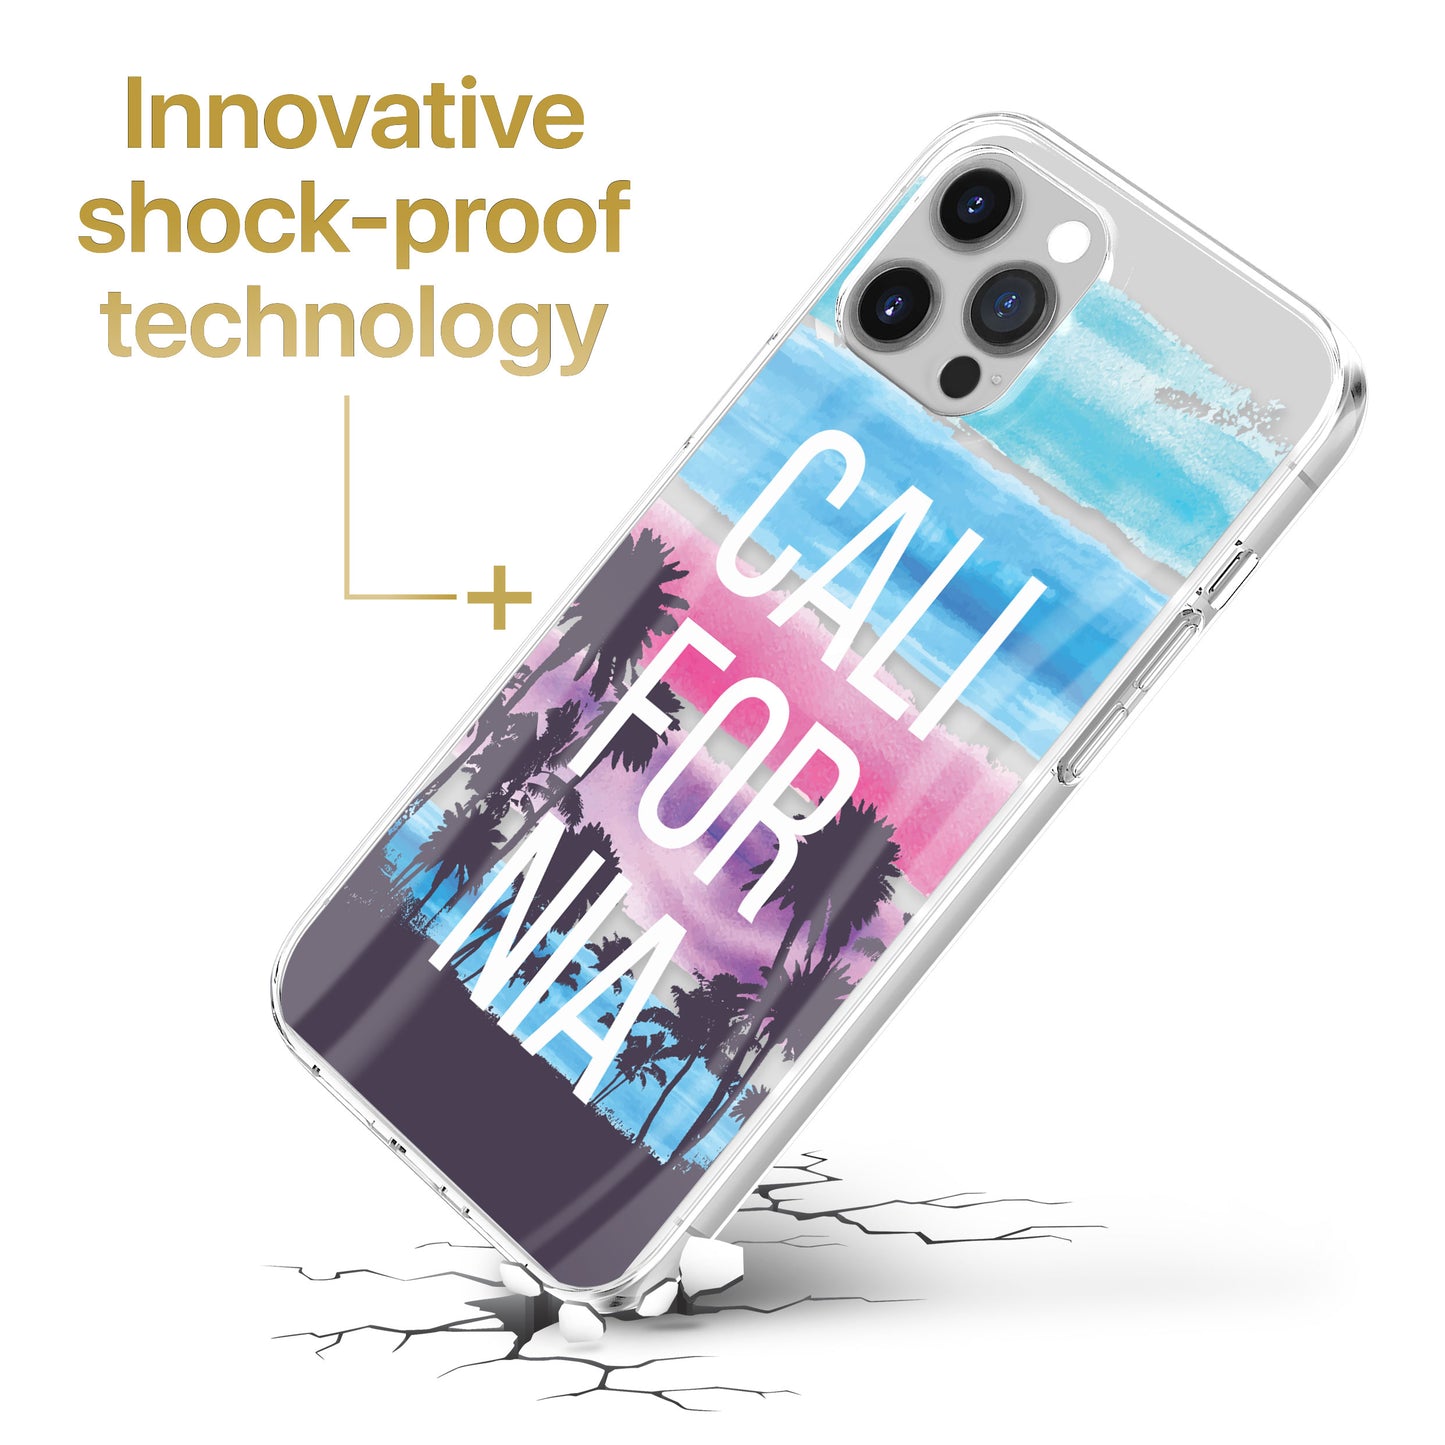 TPU Clear case with (California) Design for iPhone & Samsung Phones